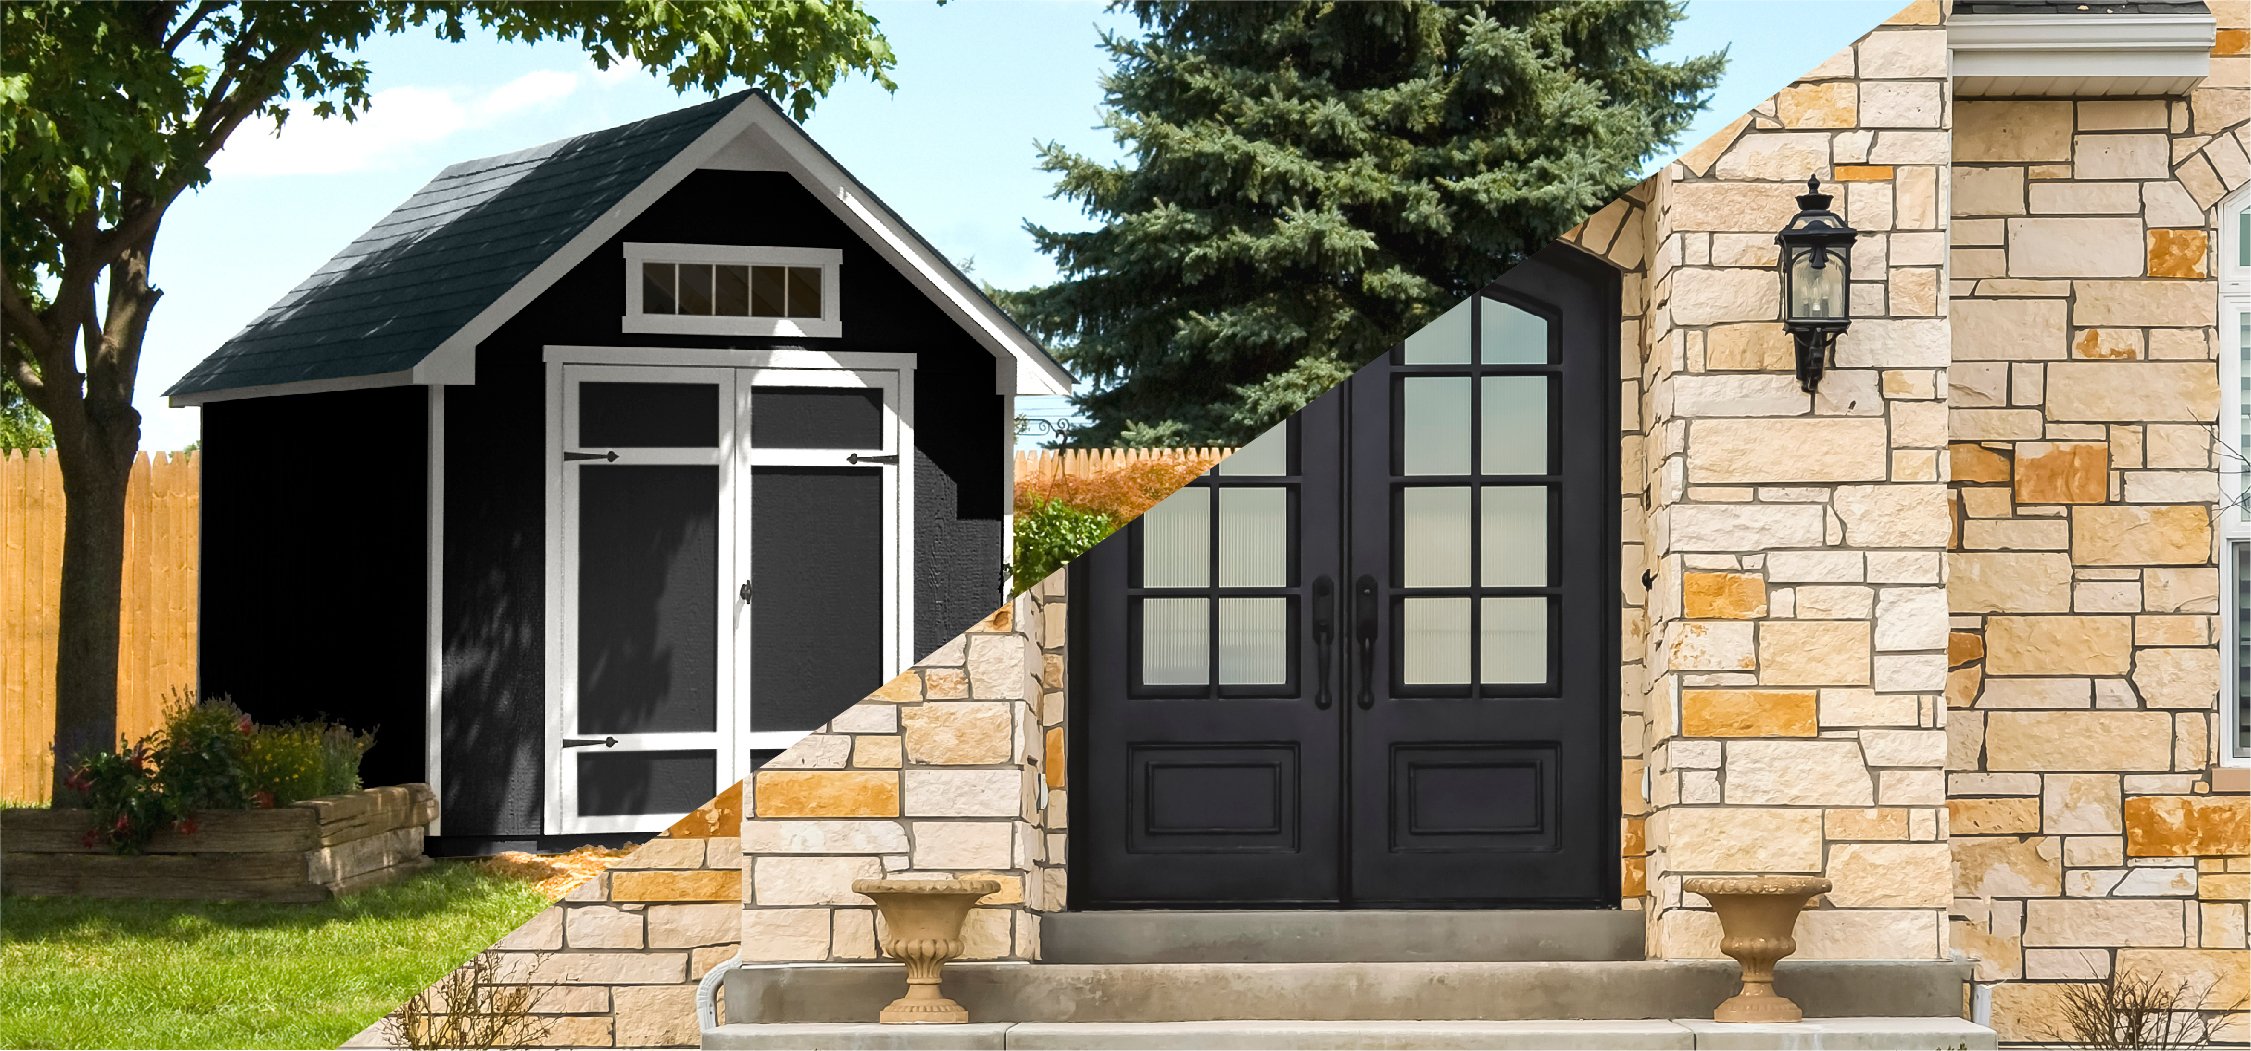 Image split diagonally. House with light brown stone face and shed painted black to complement it.